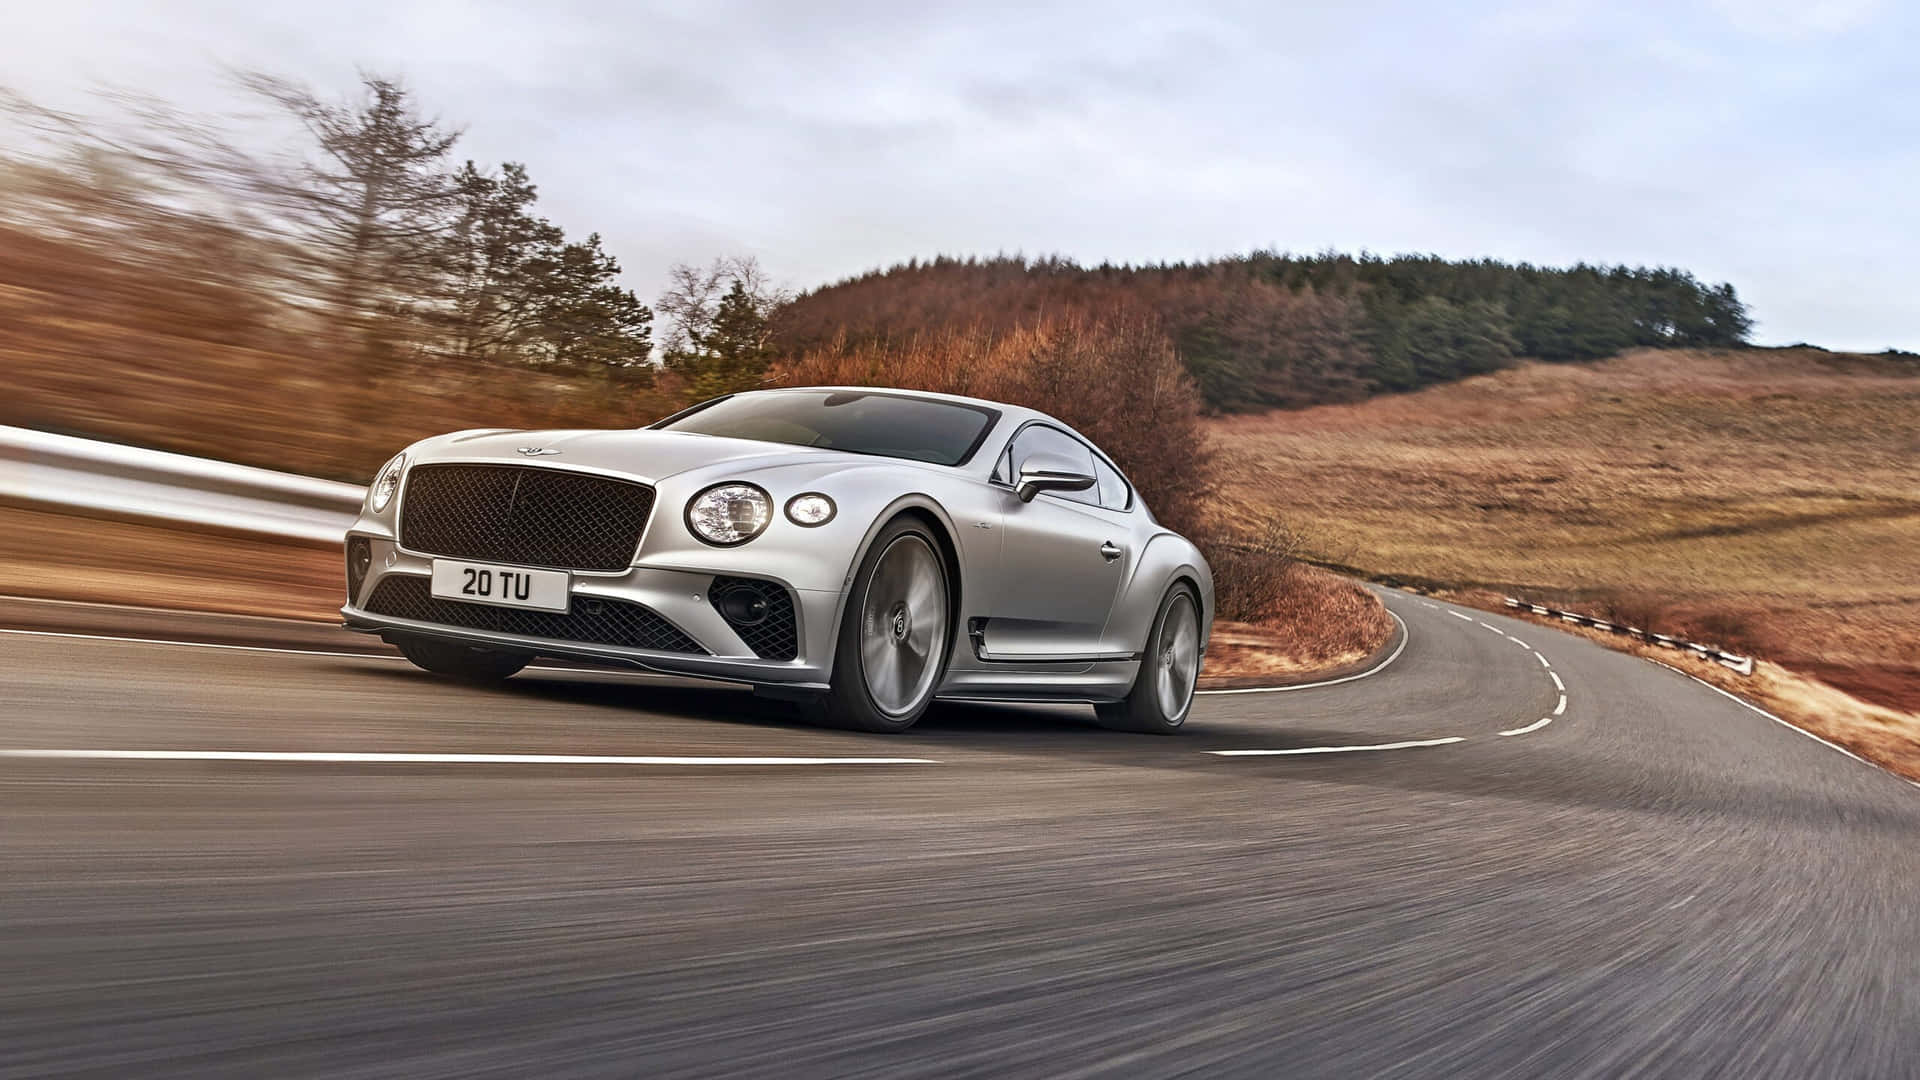 The Bentley Continental Gt Is Driving Down A Road Wallpaper